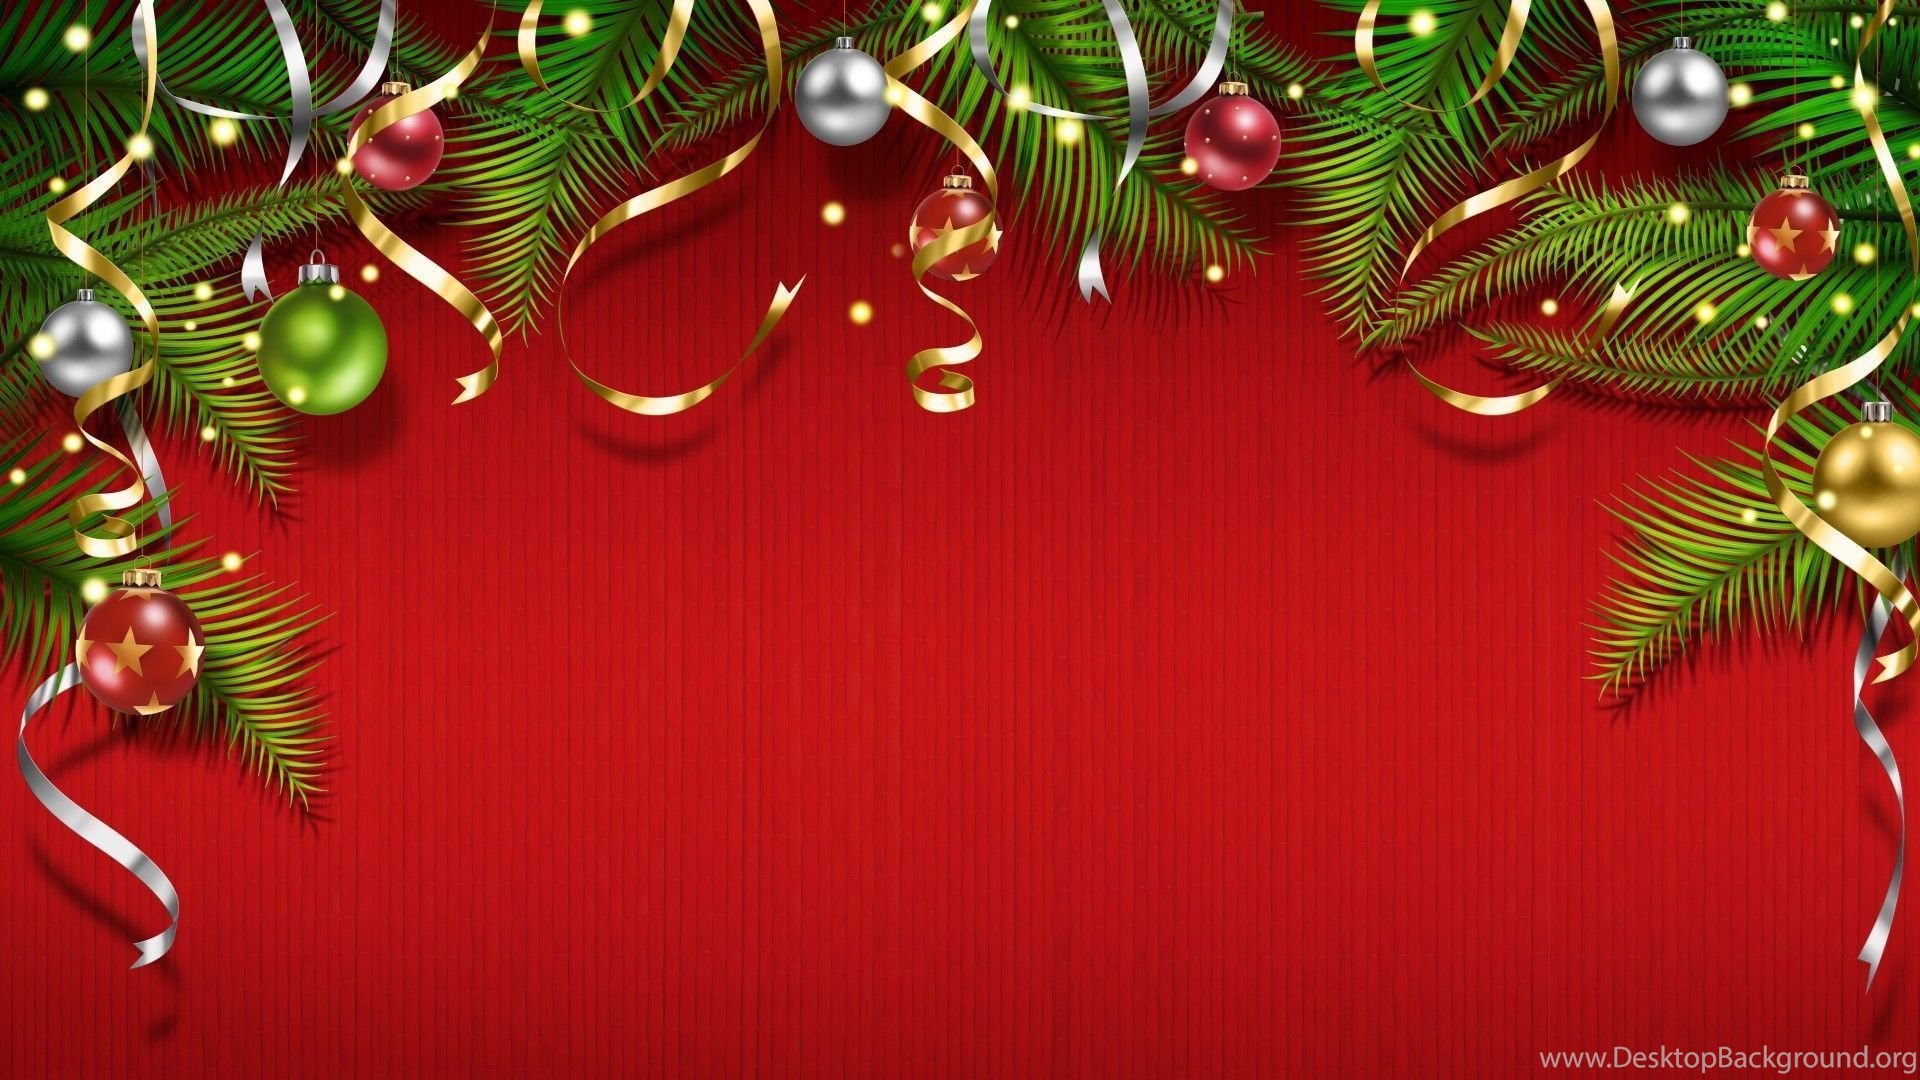 Christmas Wallpapers HD [1920x1080] Free Wallpapers Full